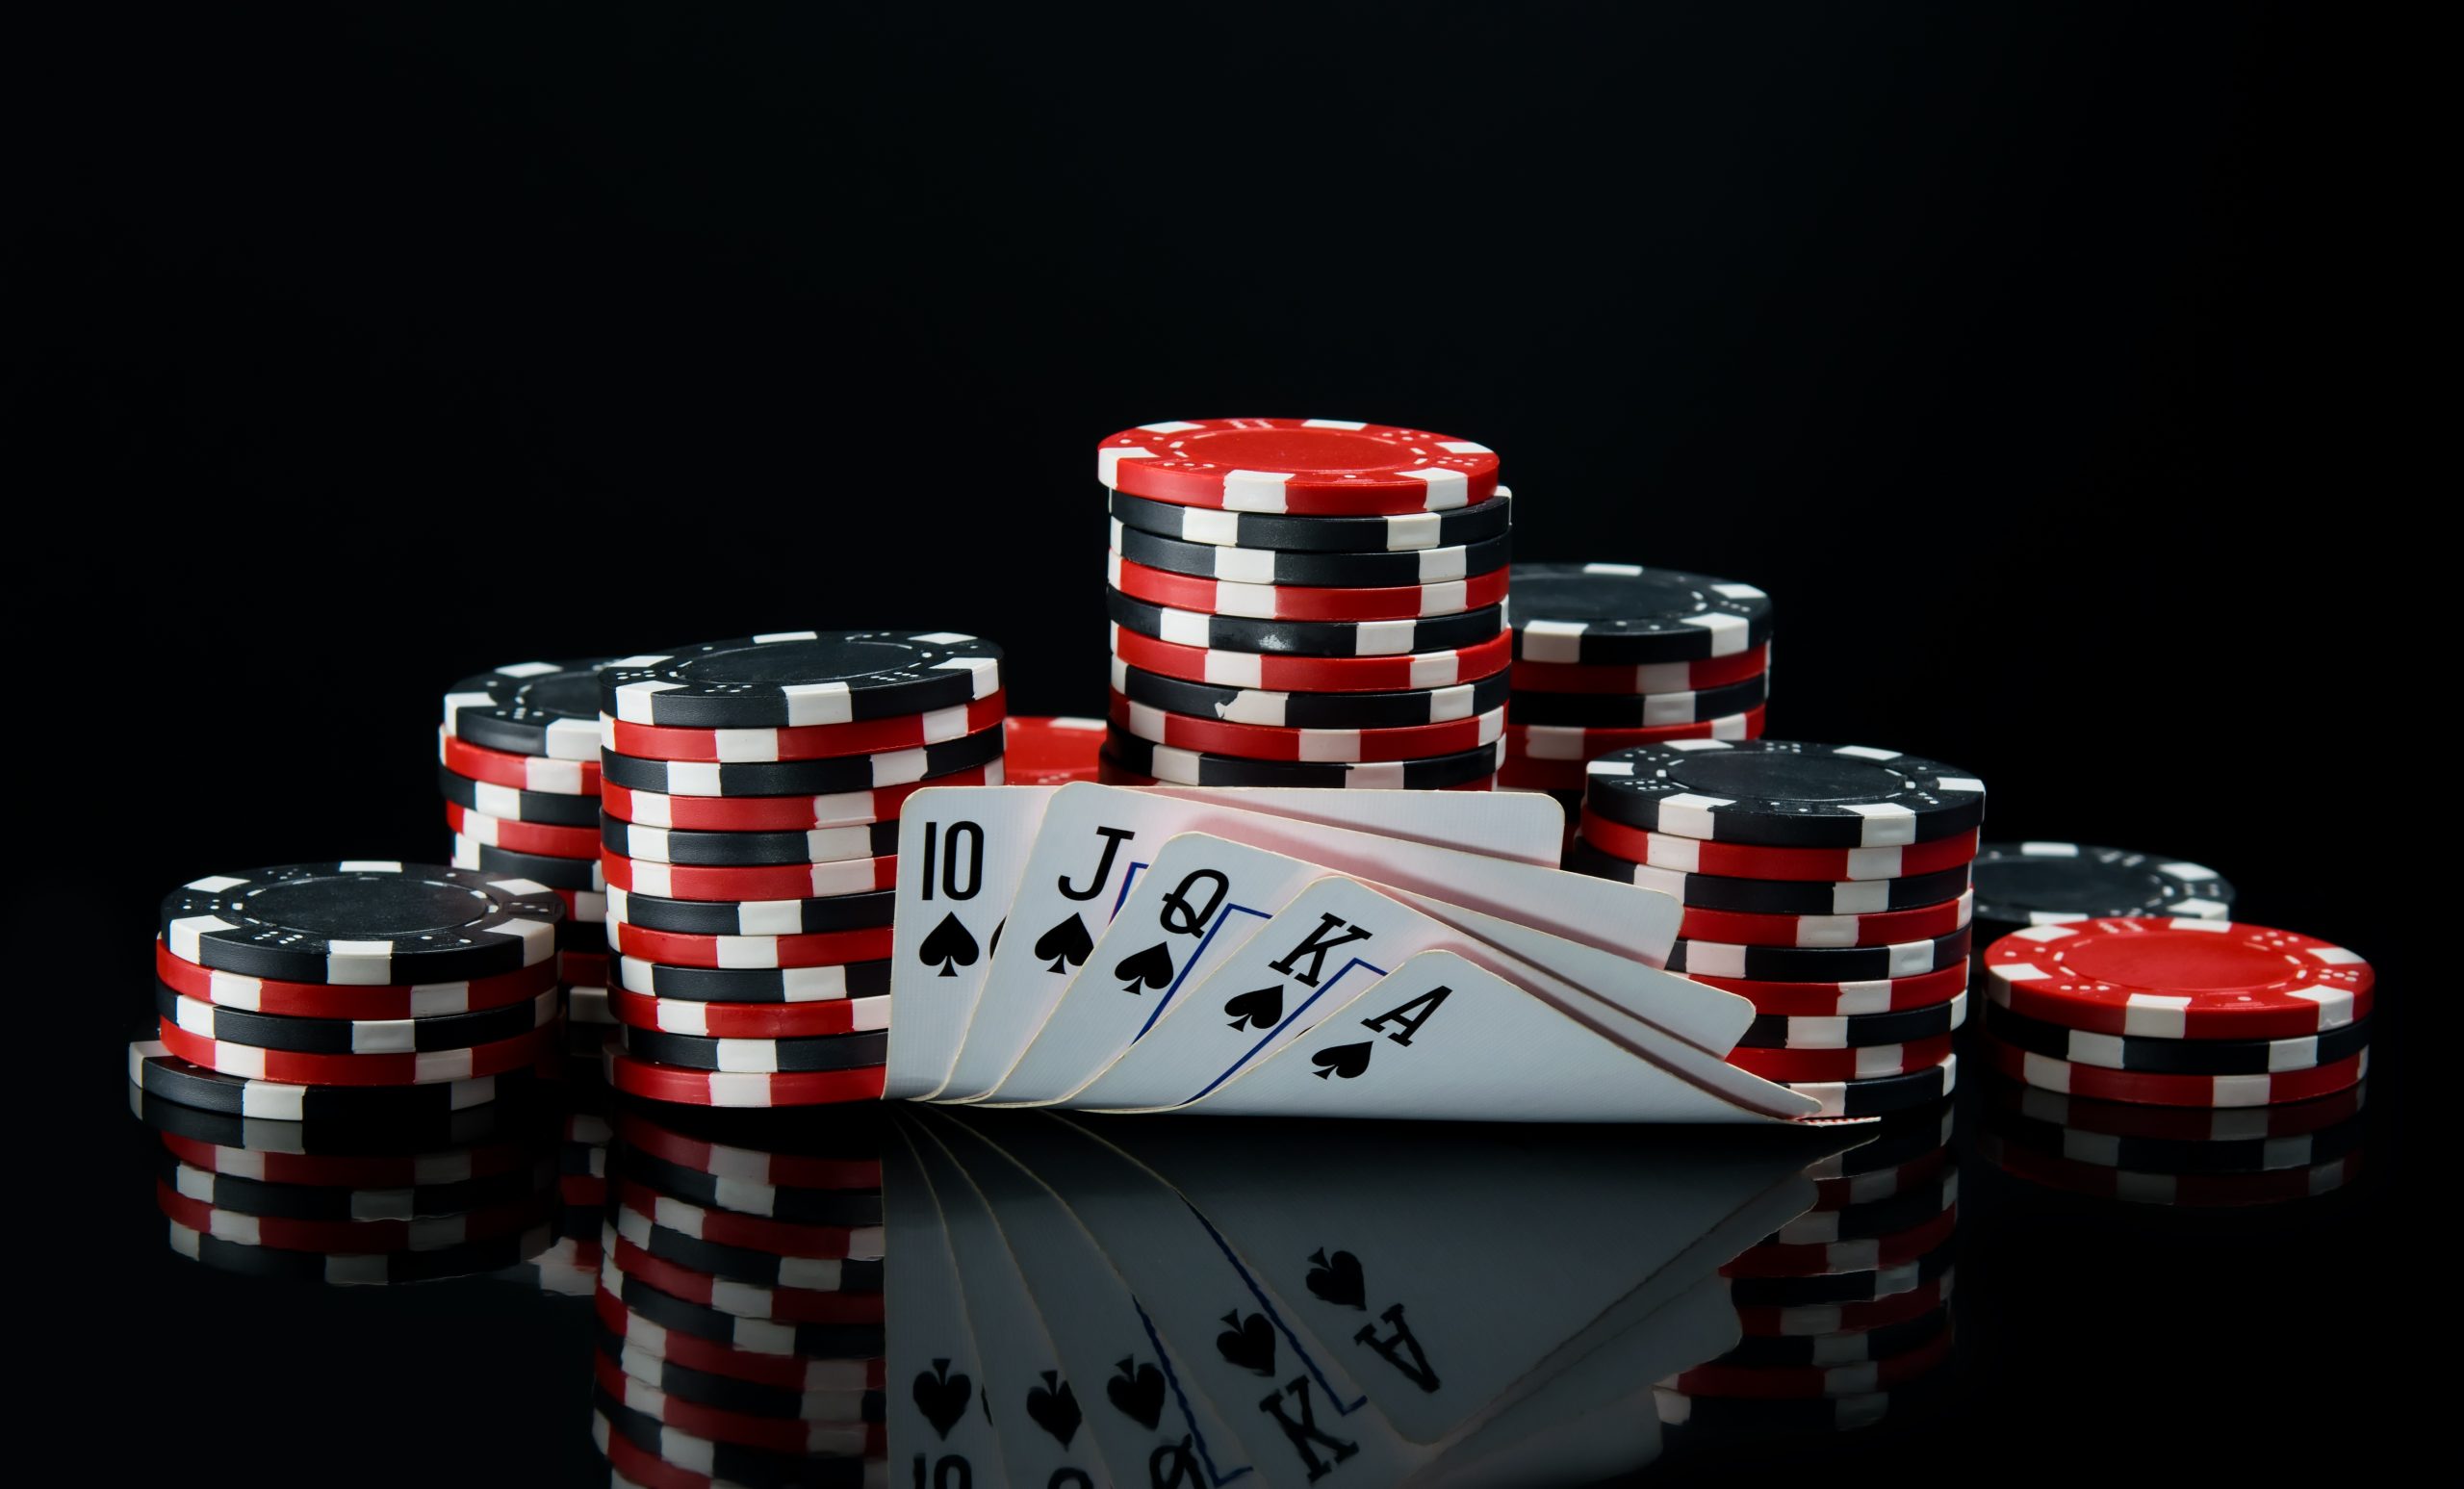 Poker Facts You Need to Know Right Now!